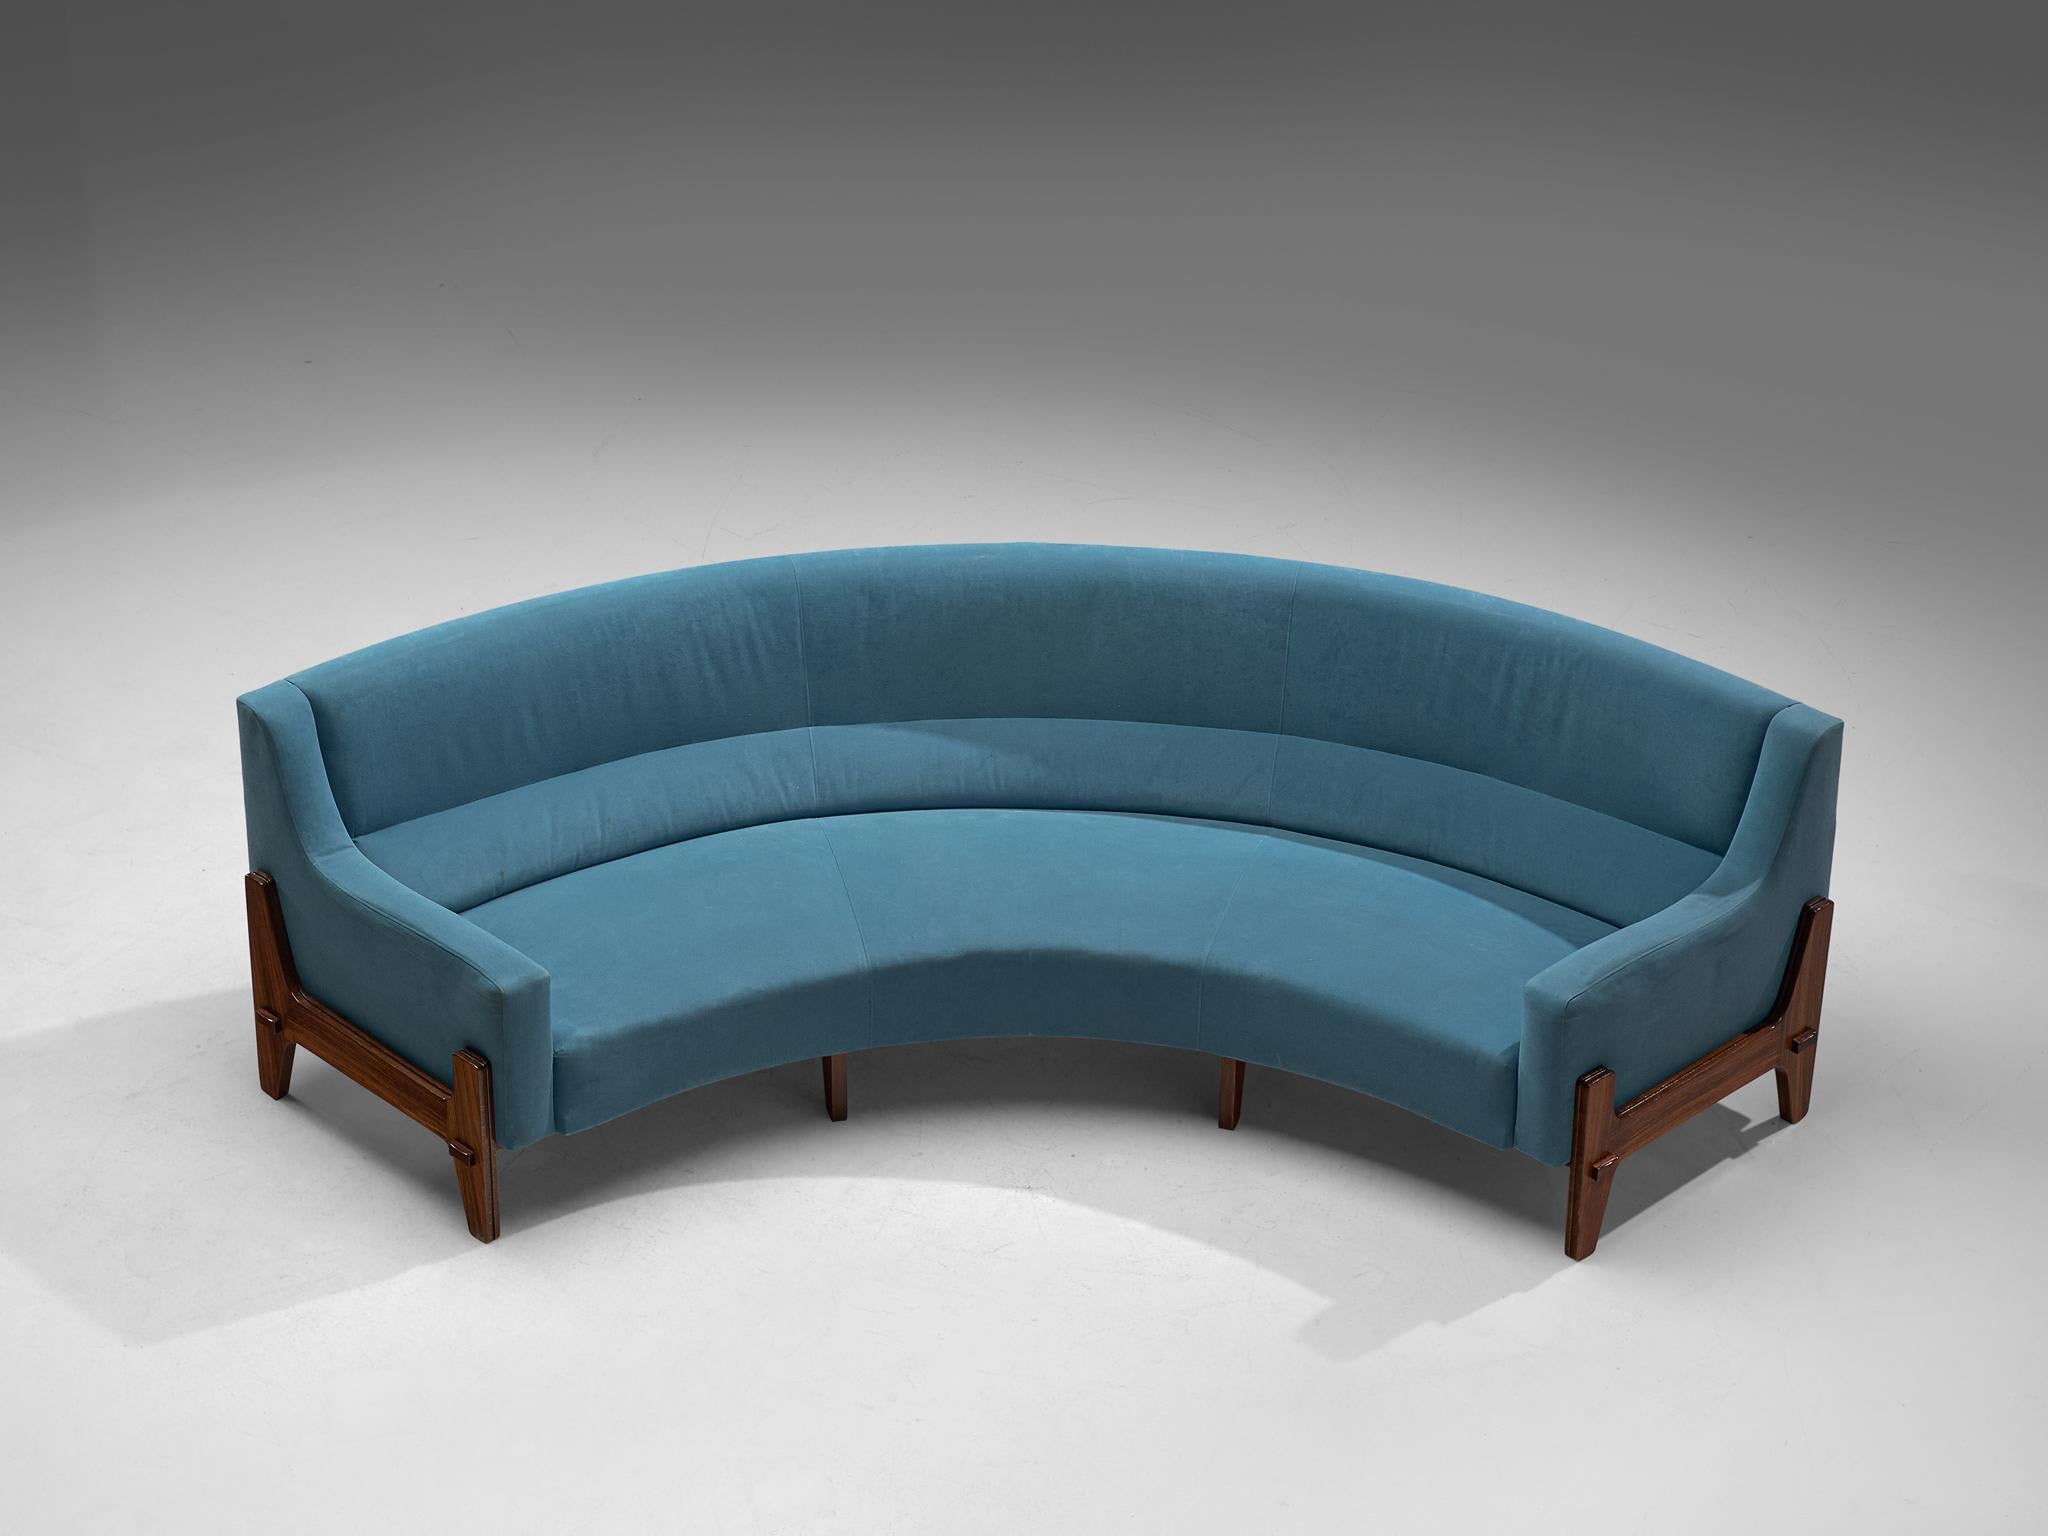 Eugenia & Luigi Reggio, curved sofa, rosewood and fabric, Italy, 1950s.

This sturdy curved sofa can a wonderful center piece in your interior. Made with a rosewood frame that is prominent in this design, and is finished with a sky blue upholstery.